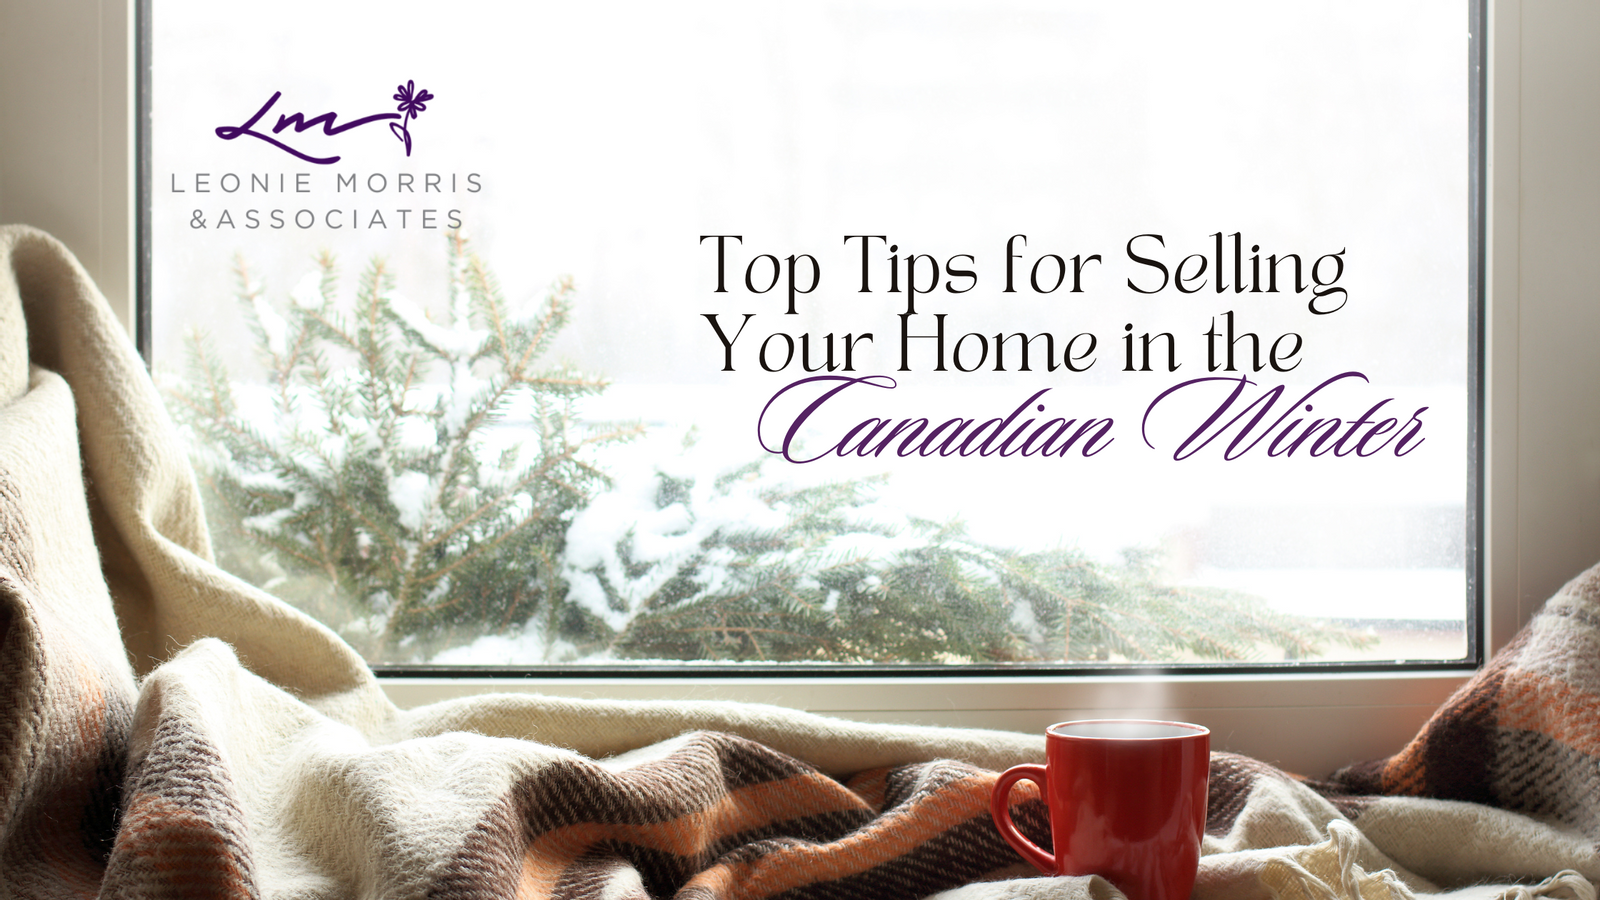 Top Tips for Selling Your Home in the Canadian Winter